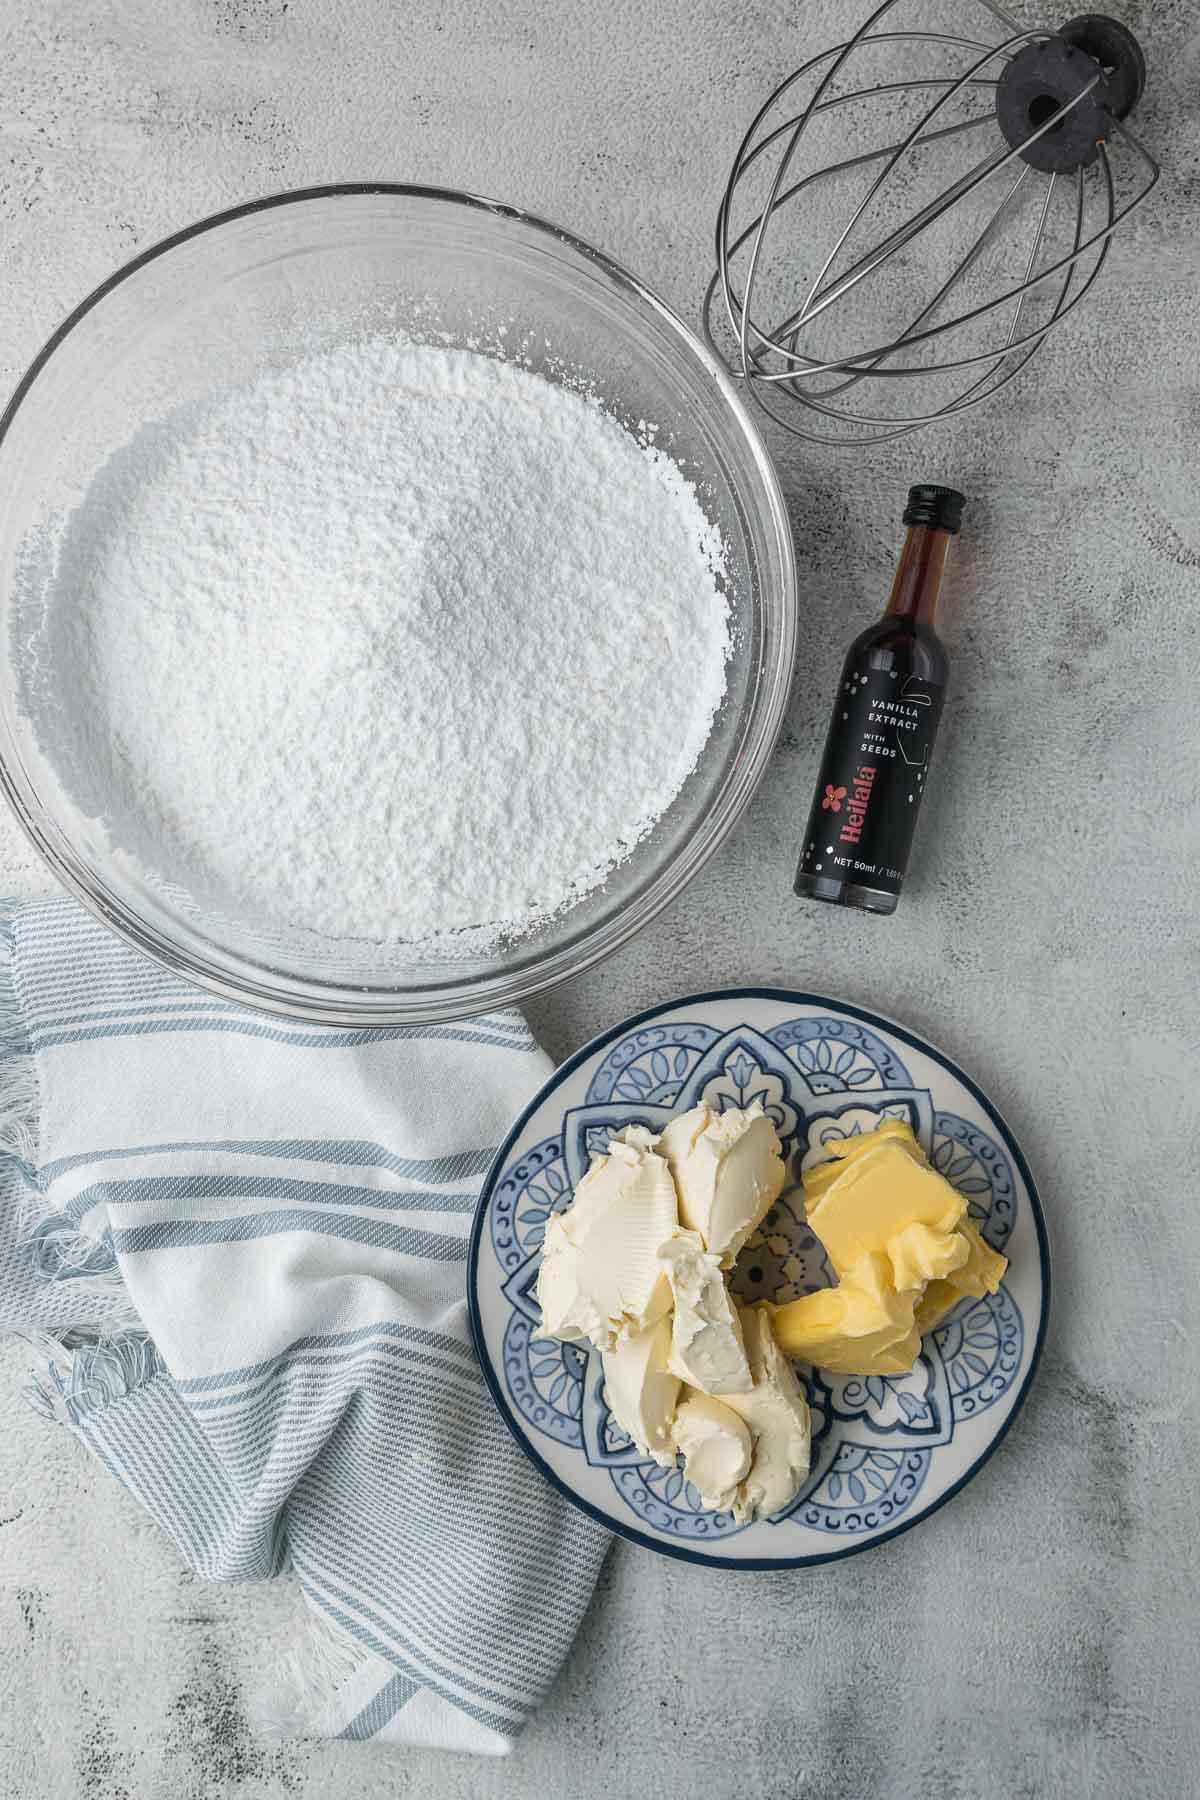 Cream cheese icing ingredients